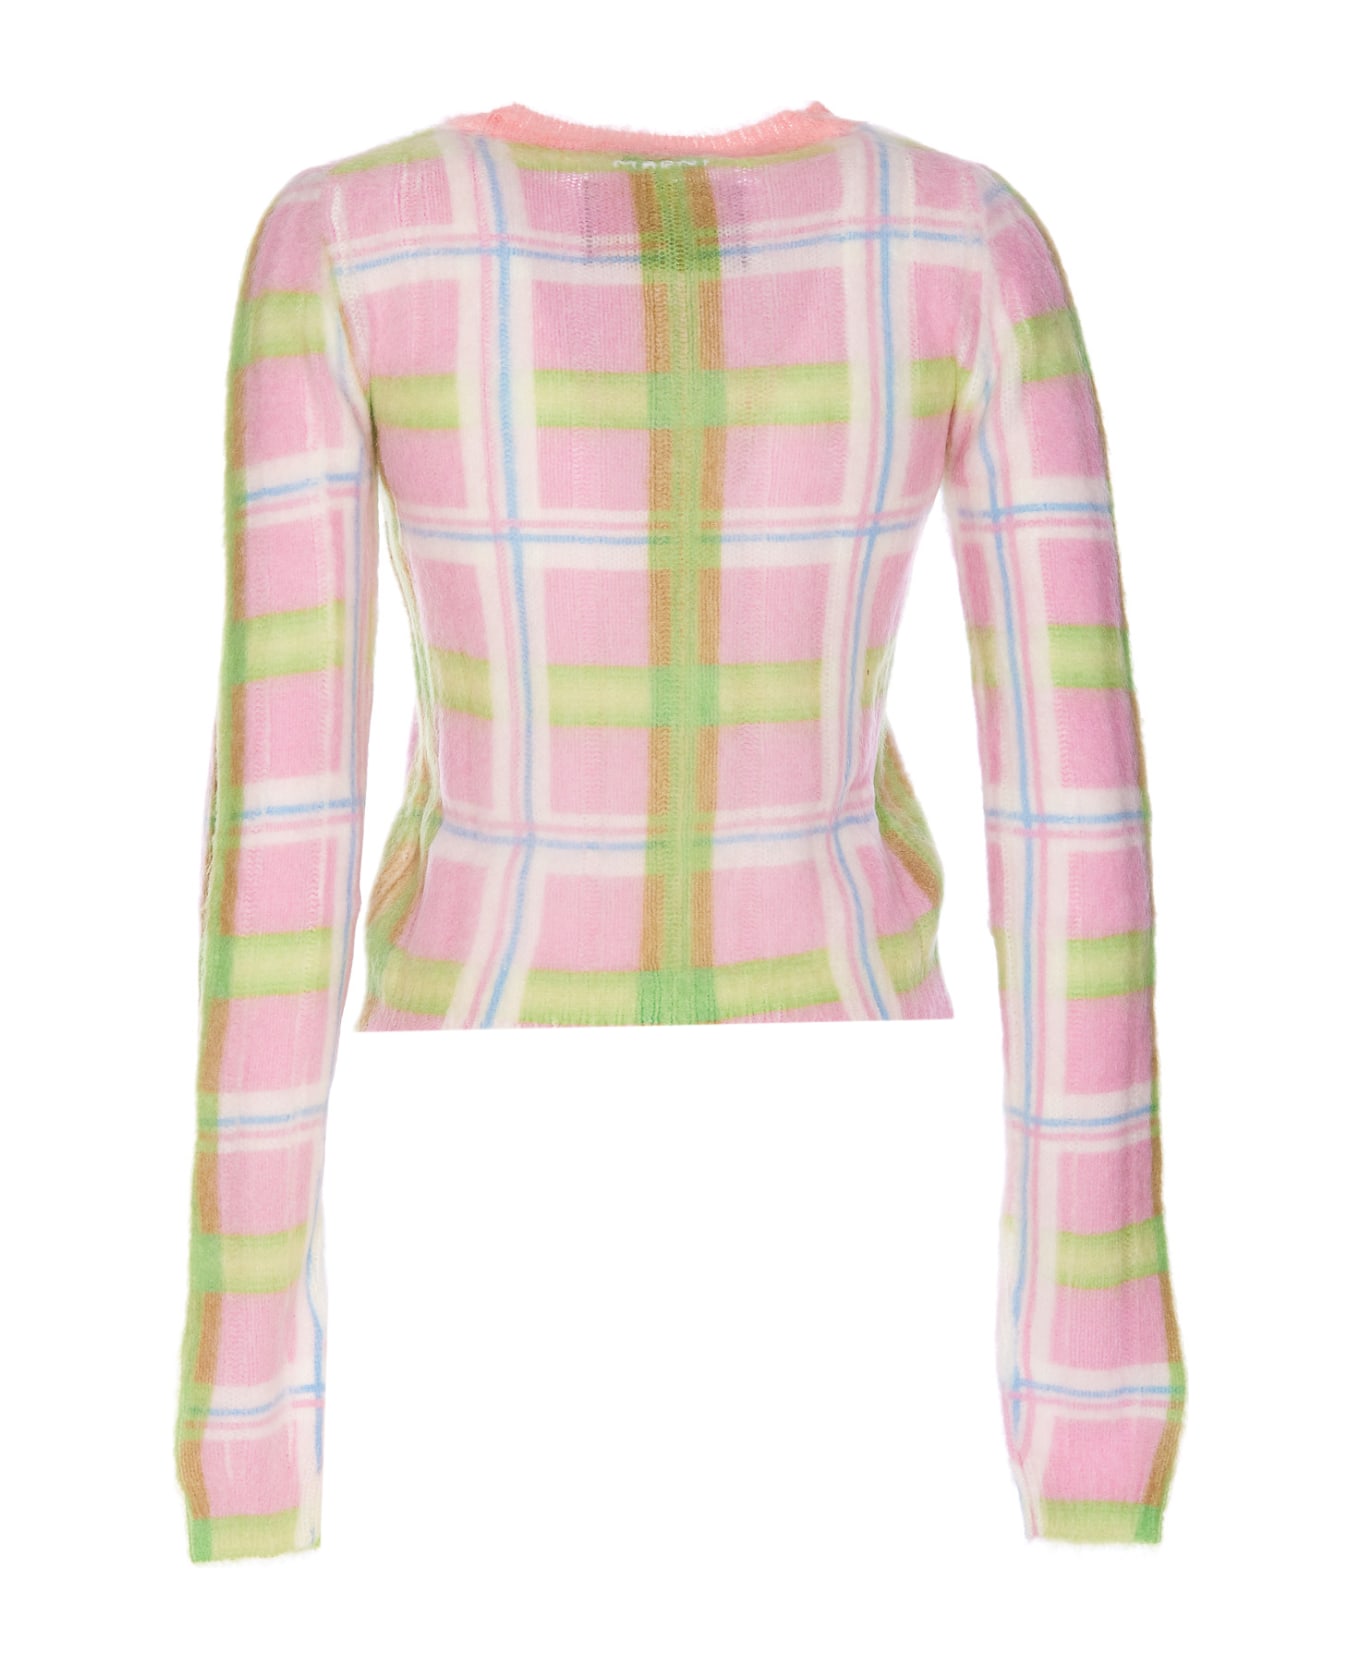 Marni Mohair Brushed Checked Sweater - Pink